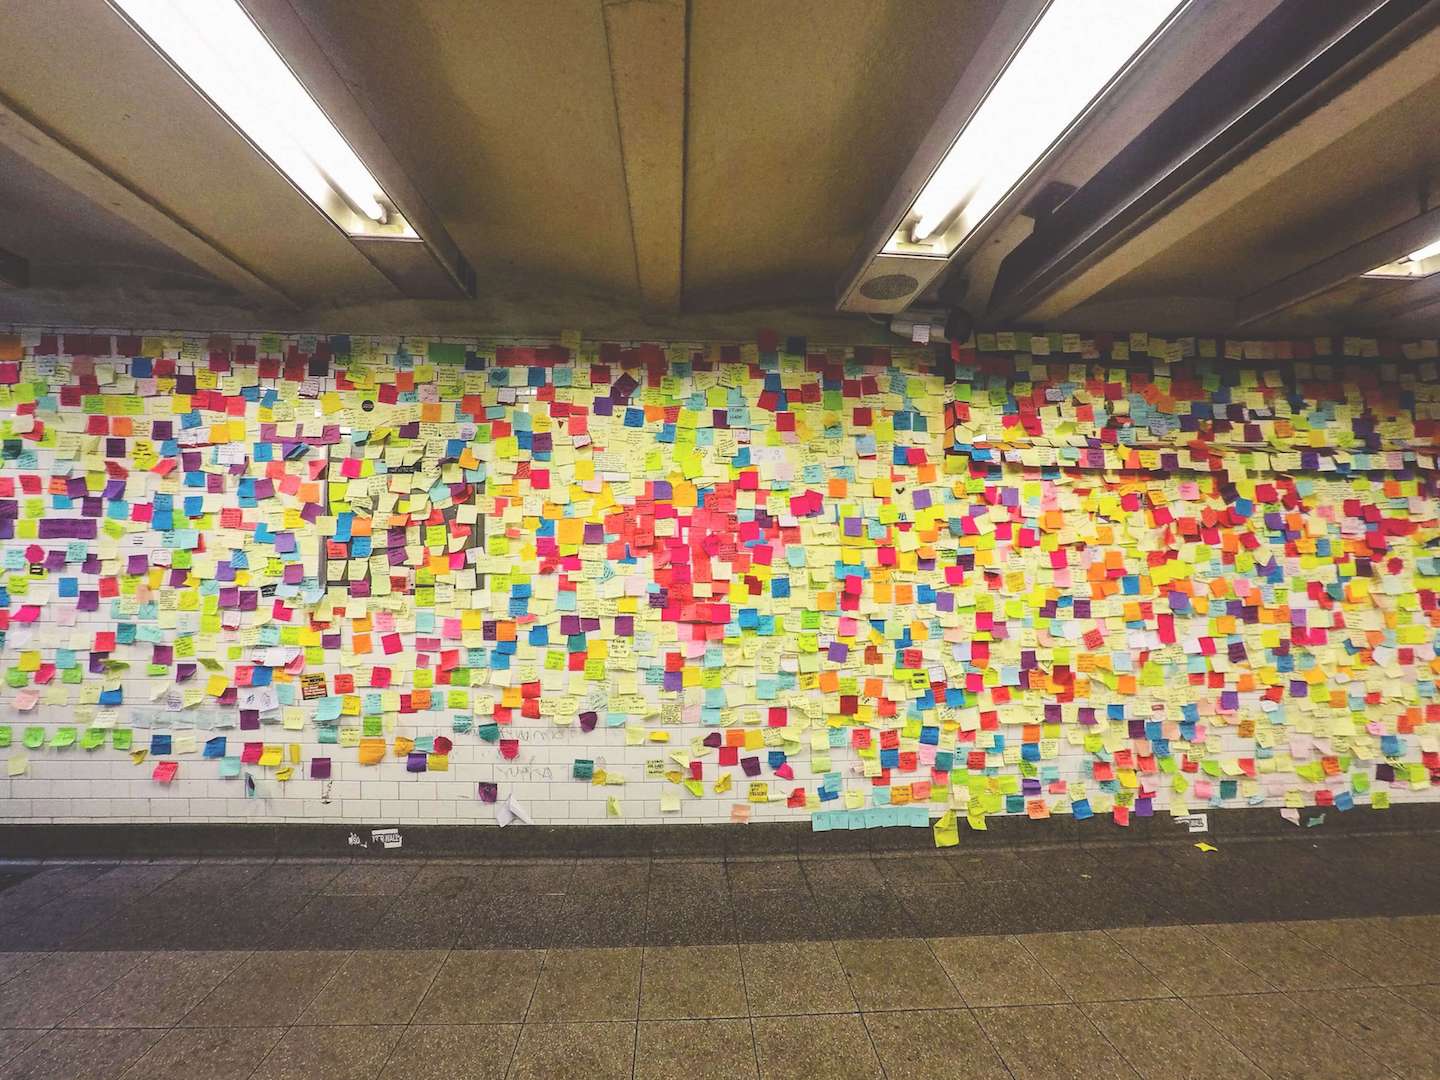 Post it wall in subway station for Union Square